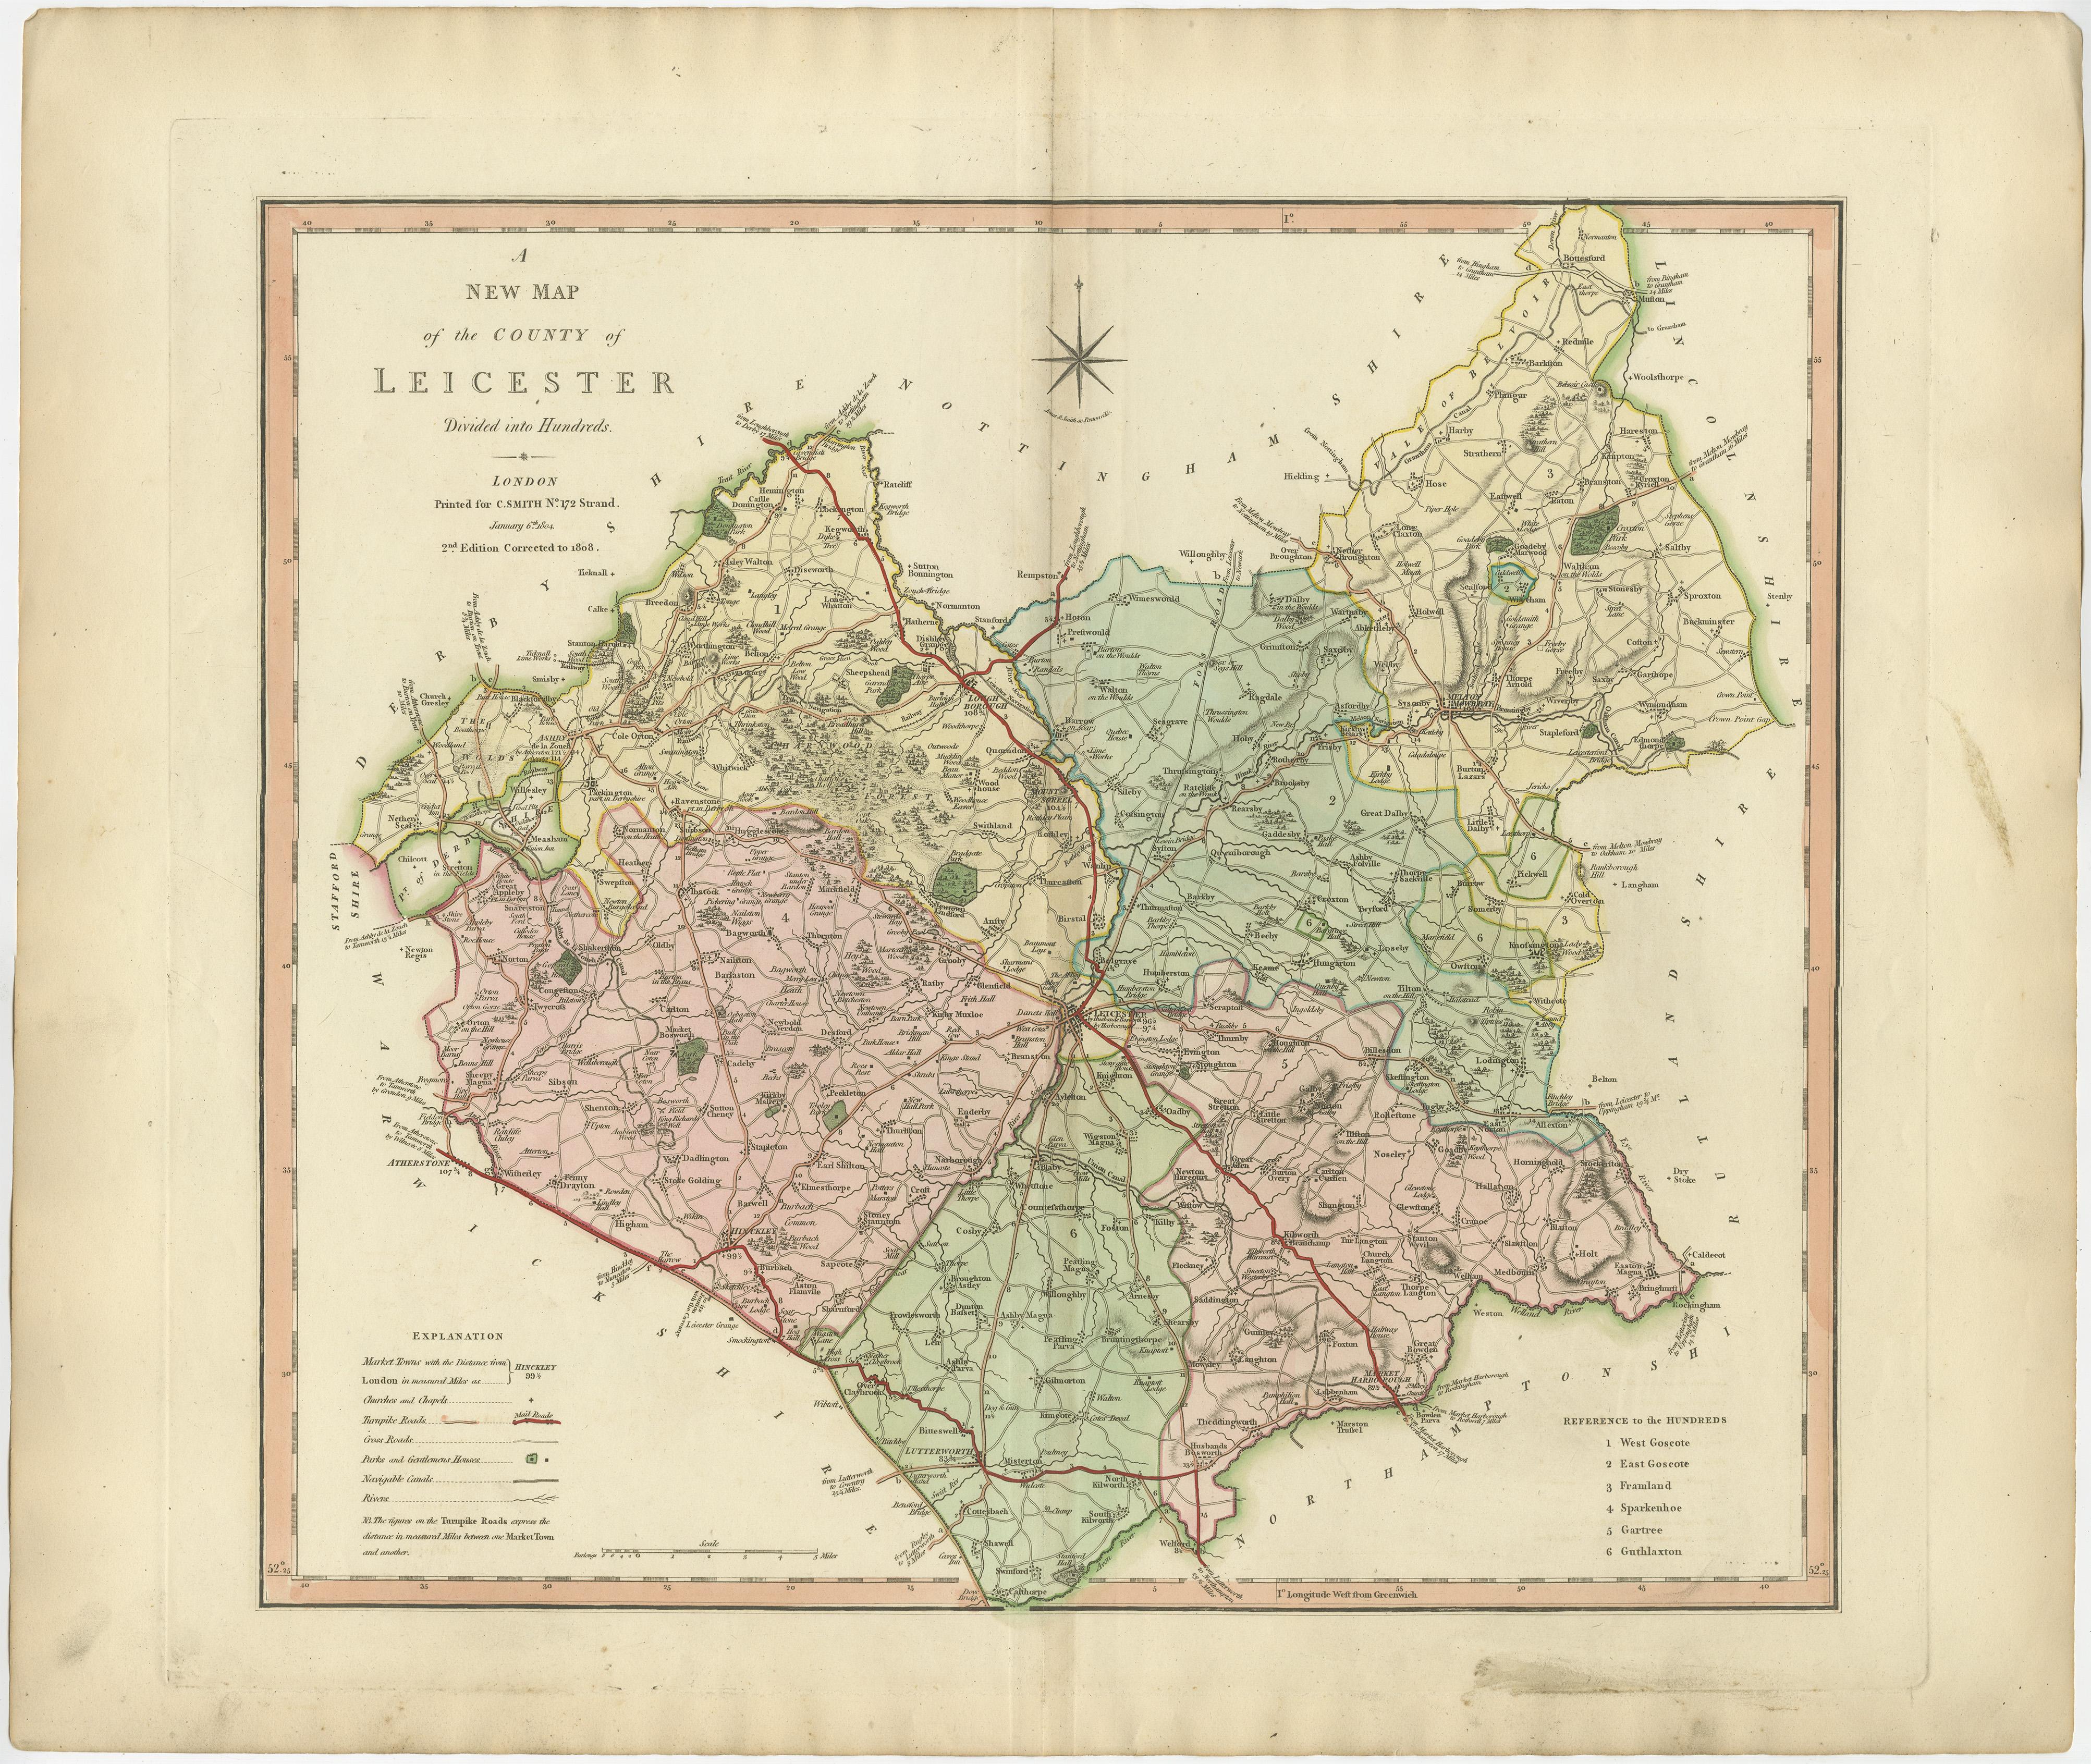 Antique county map of Leicestershire first published c.1800. Villages, towns, and cities illustrated include Lutterworth, Ashby, Hinkley, and Market Harborough.

Charles Smith was a cartographer working in London from circa 1800. His maps were